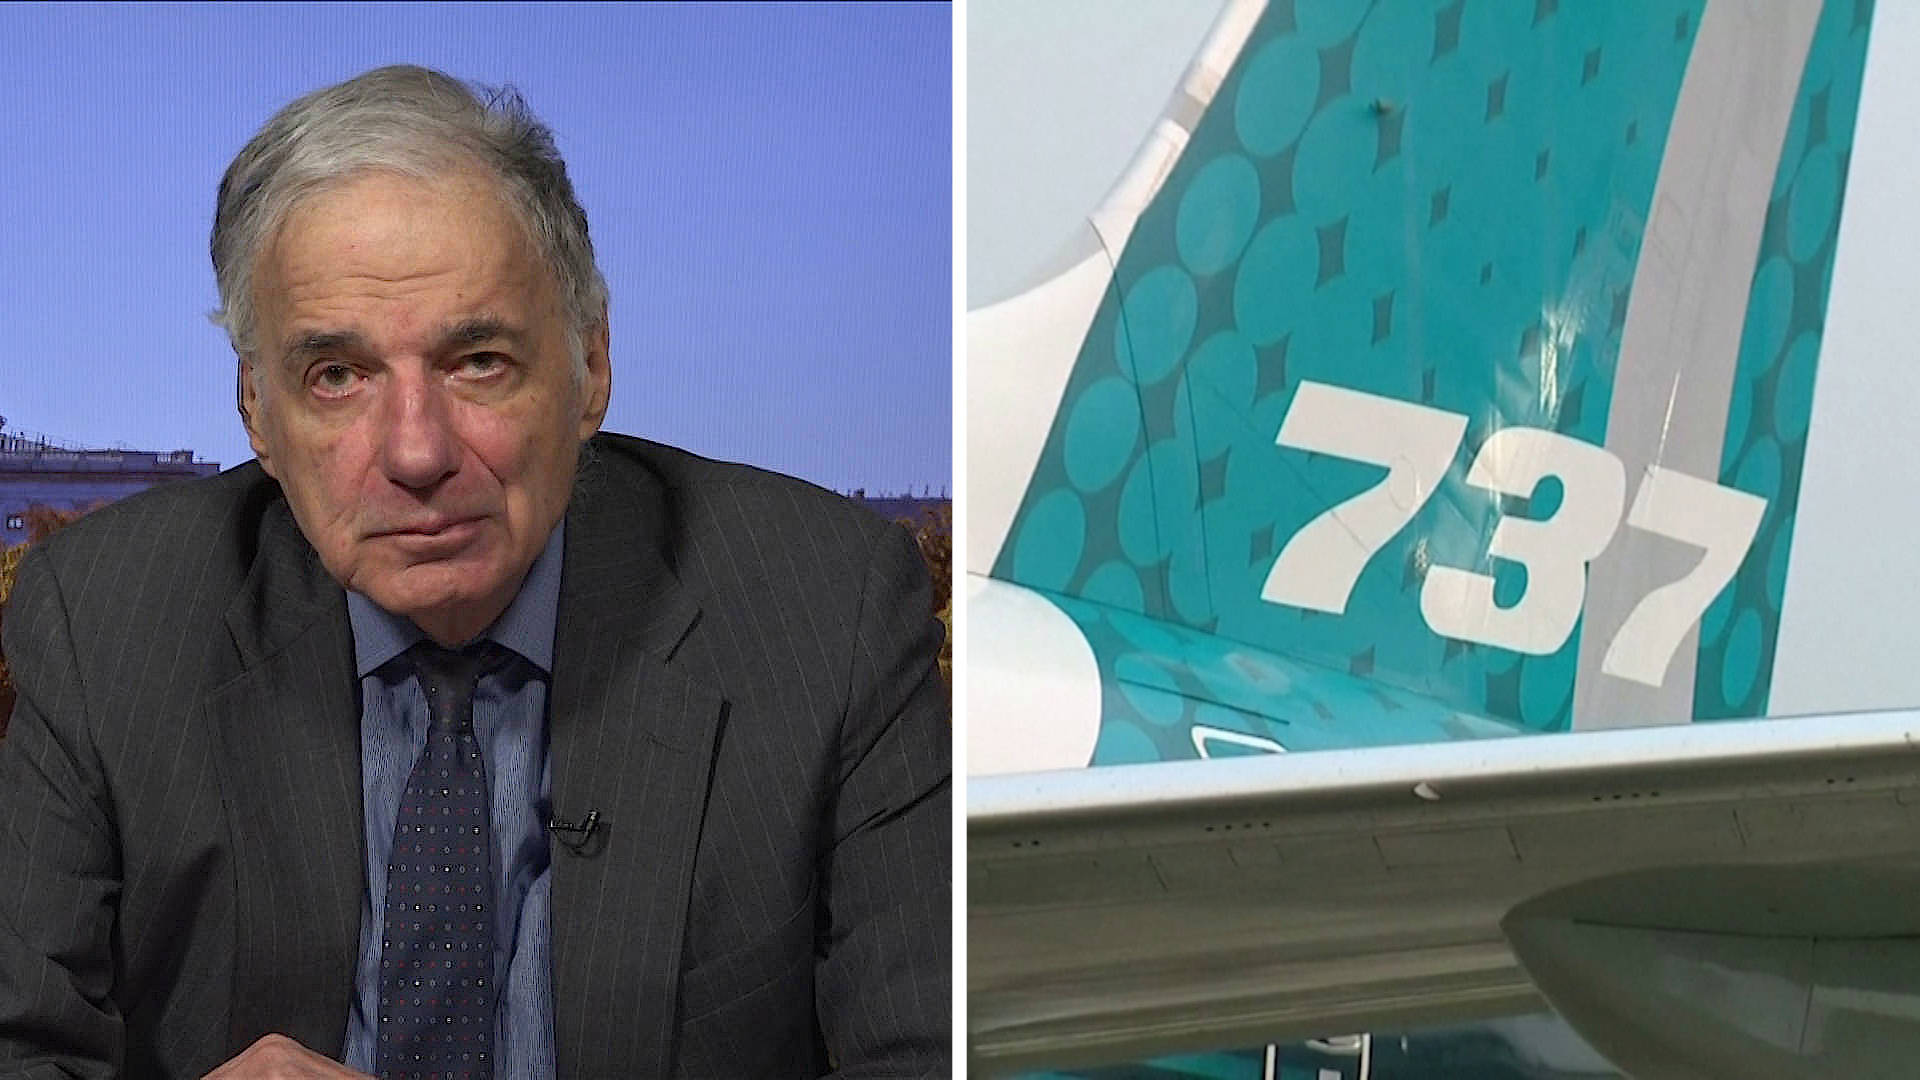 Ralph Nader on Corporate Crime, Holding Boeing Accountable for 737 MAX Deaths & Biden's First Weeks